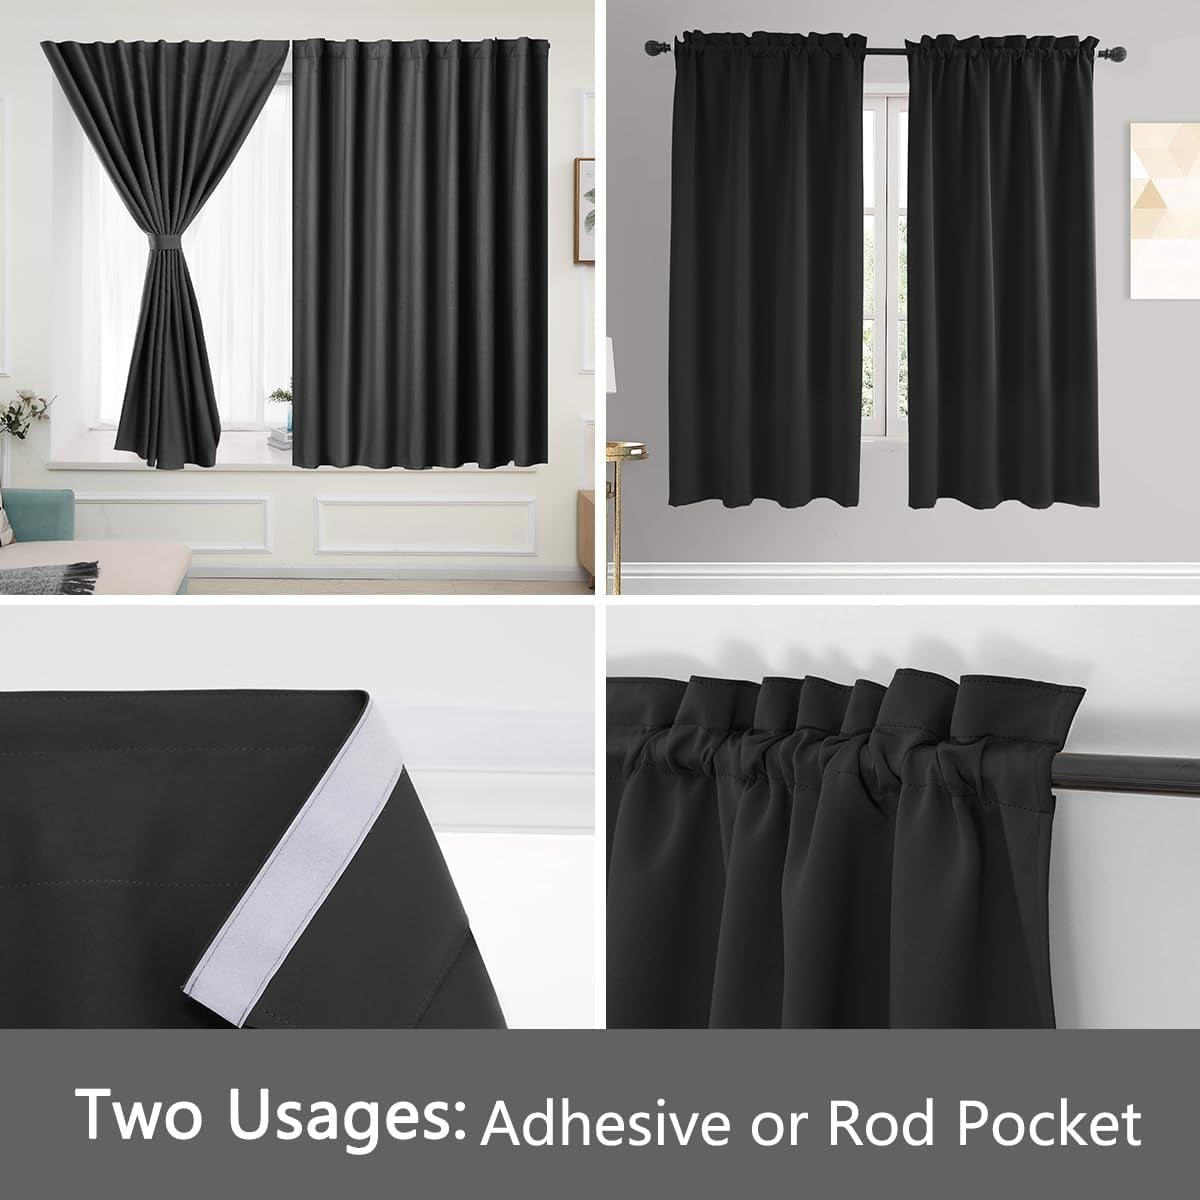 Muamar 2Pcs Blackout Curtains Privacy Curtains 63 Inch Length Window Curtains,Easy Install Thermal Insulated Window Shades,Stick Curtains No Rods, Black 42" W X 63" L  Muamar   